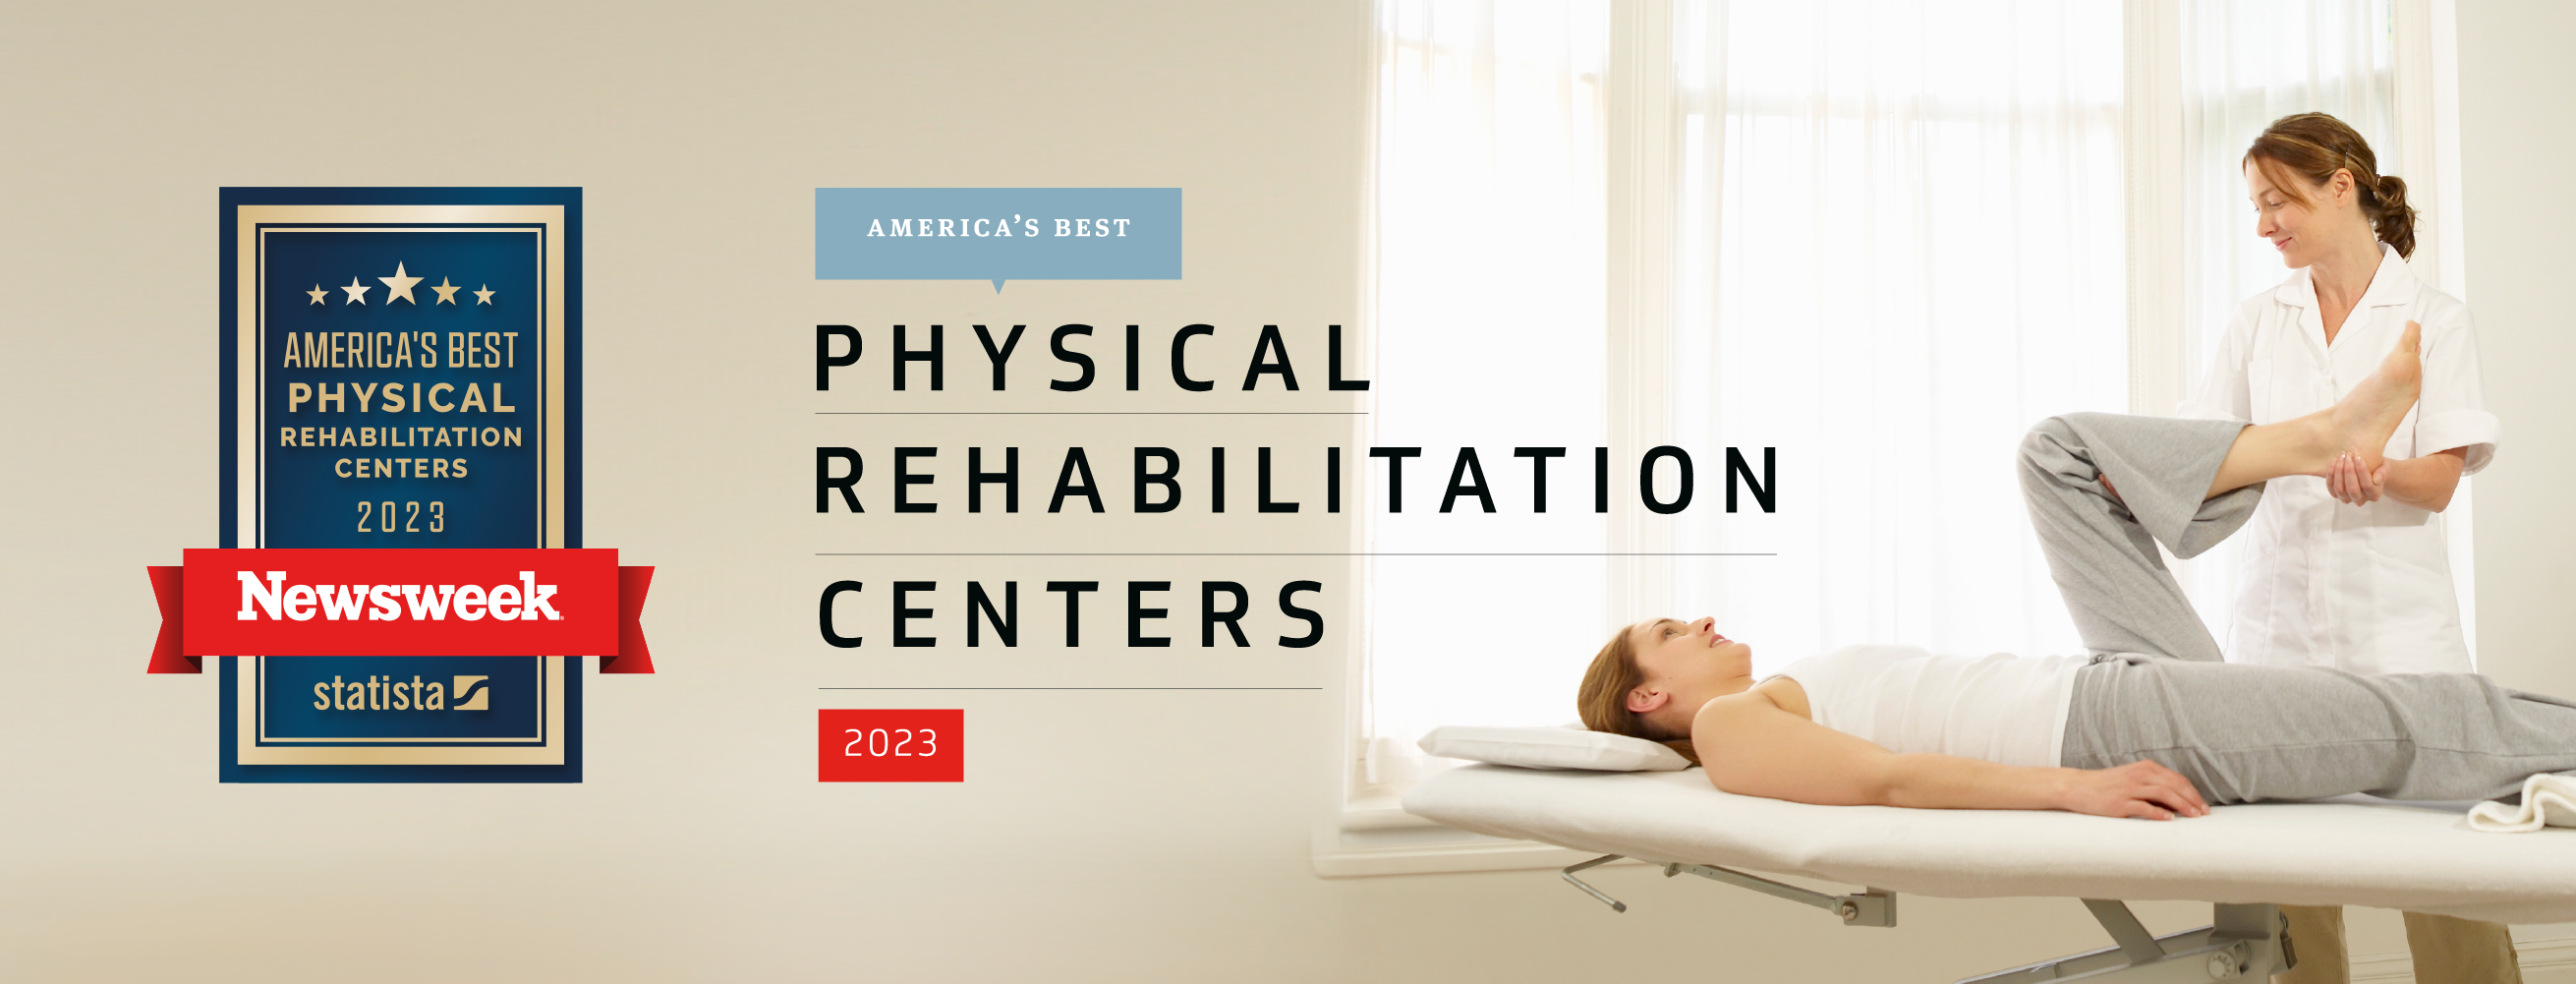 Physical Therapy in California South Bay for Pain Care - TENS